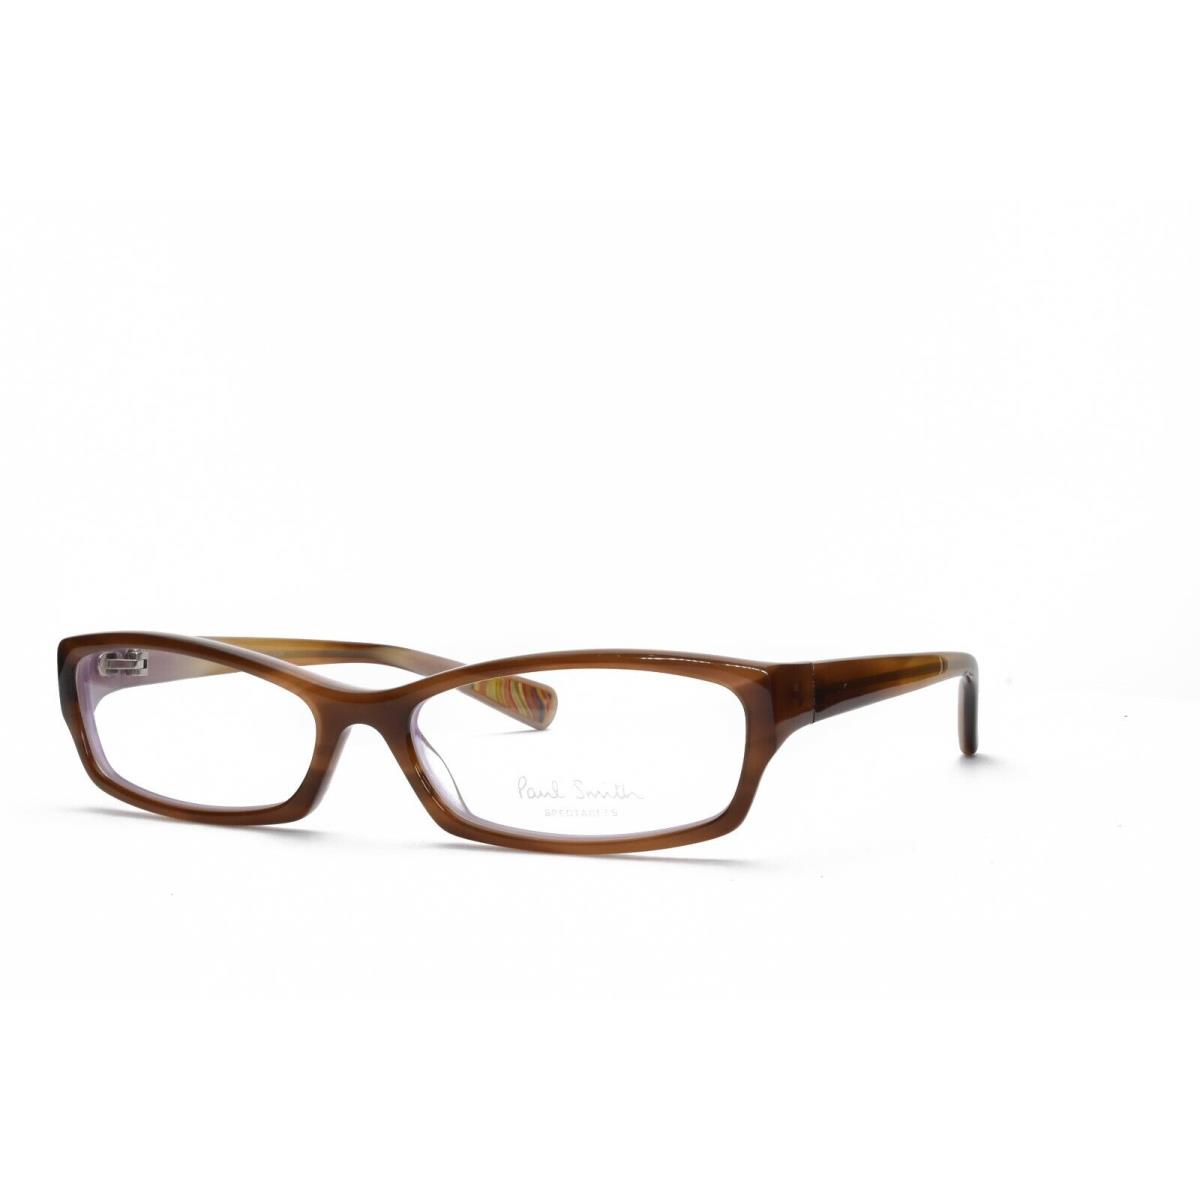 Paul Smith PS 298 Cyclv Eyeglasses Frames Only 55-16-130